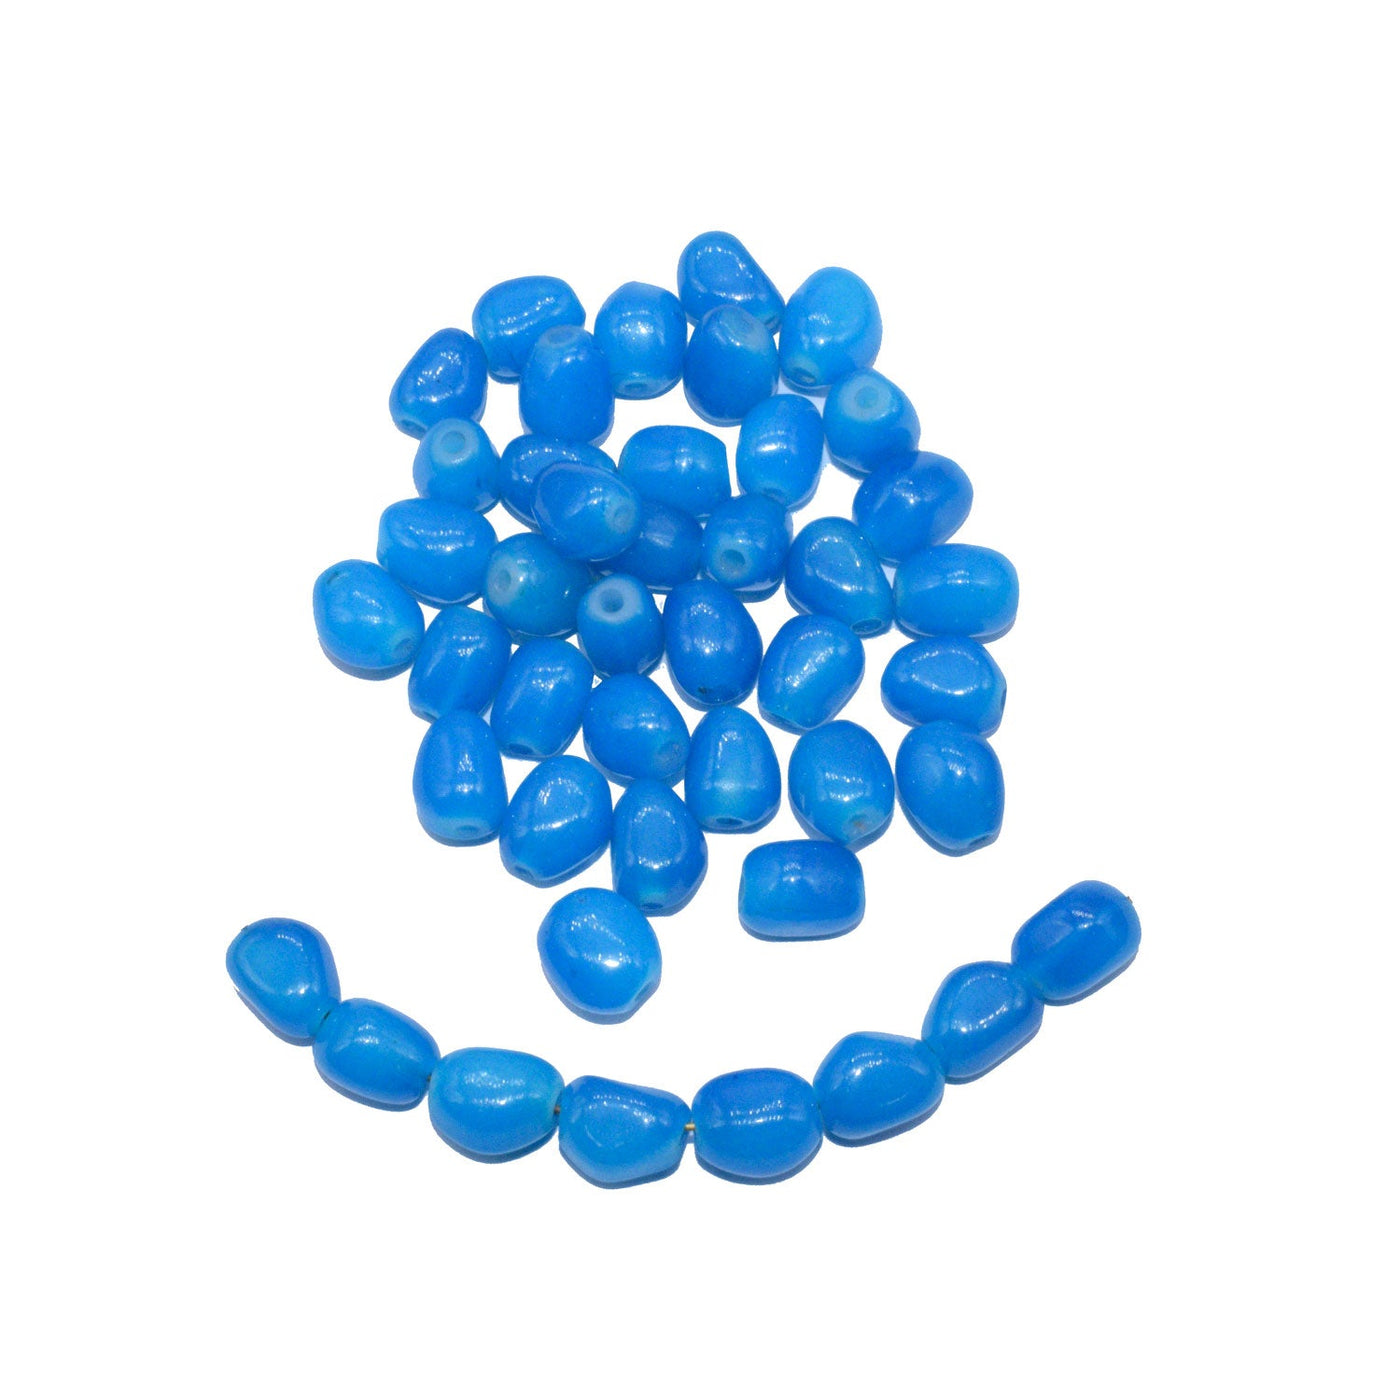 Deep Blue Tumble Painted Glass Beads